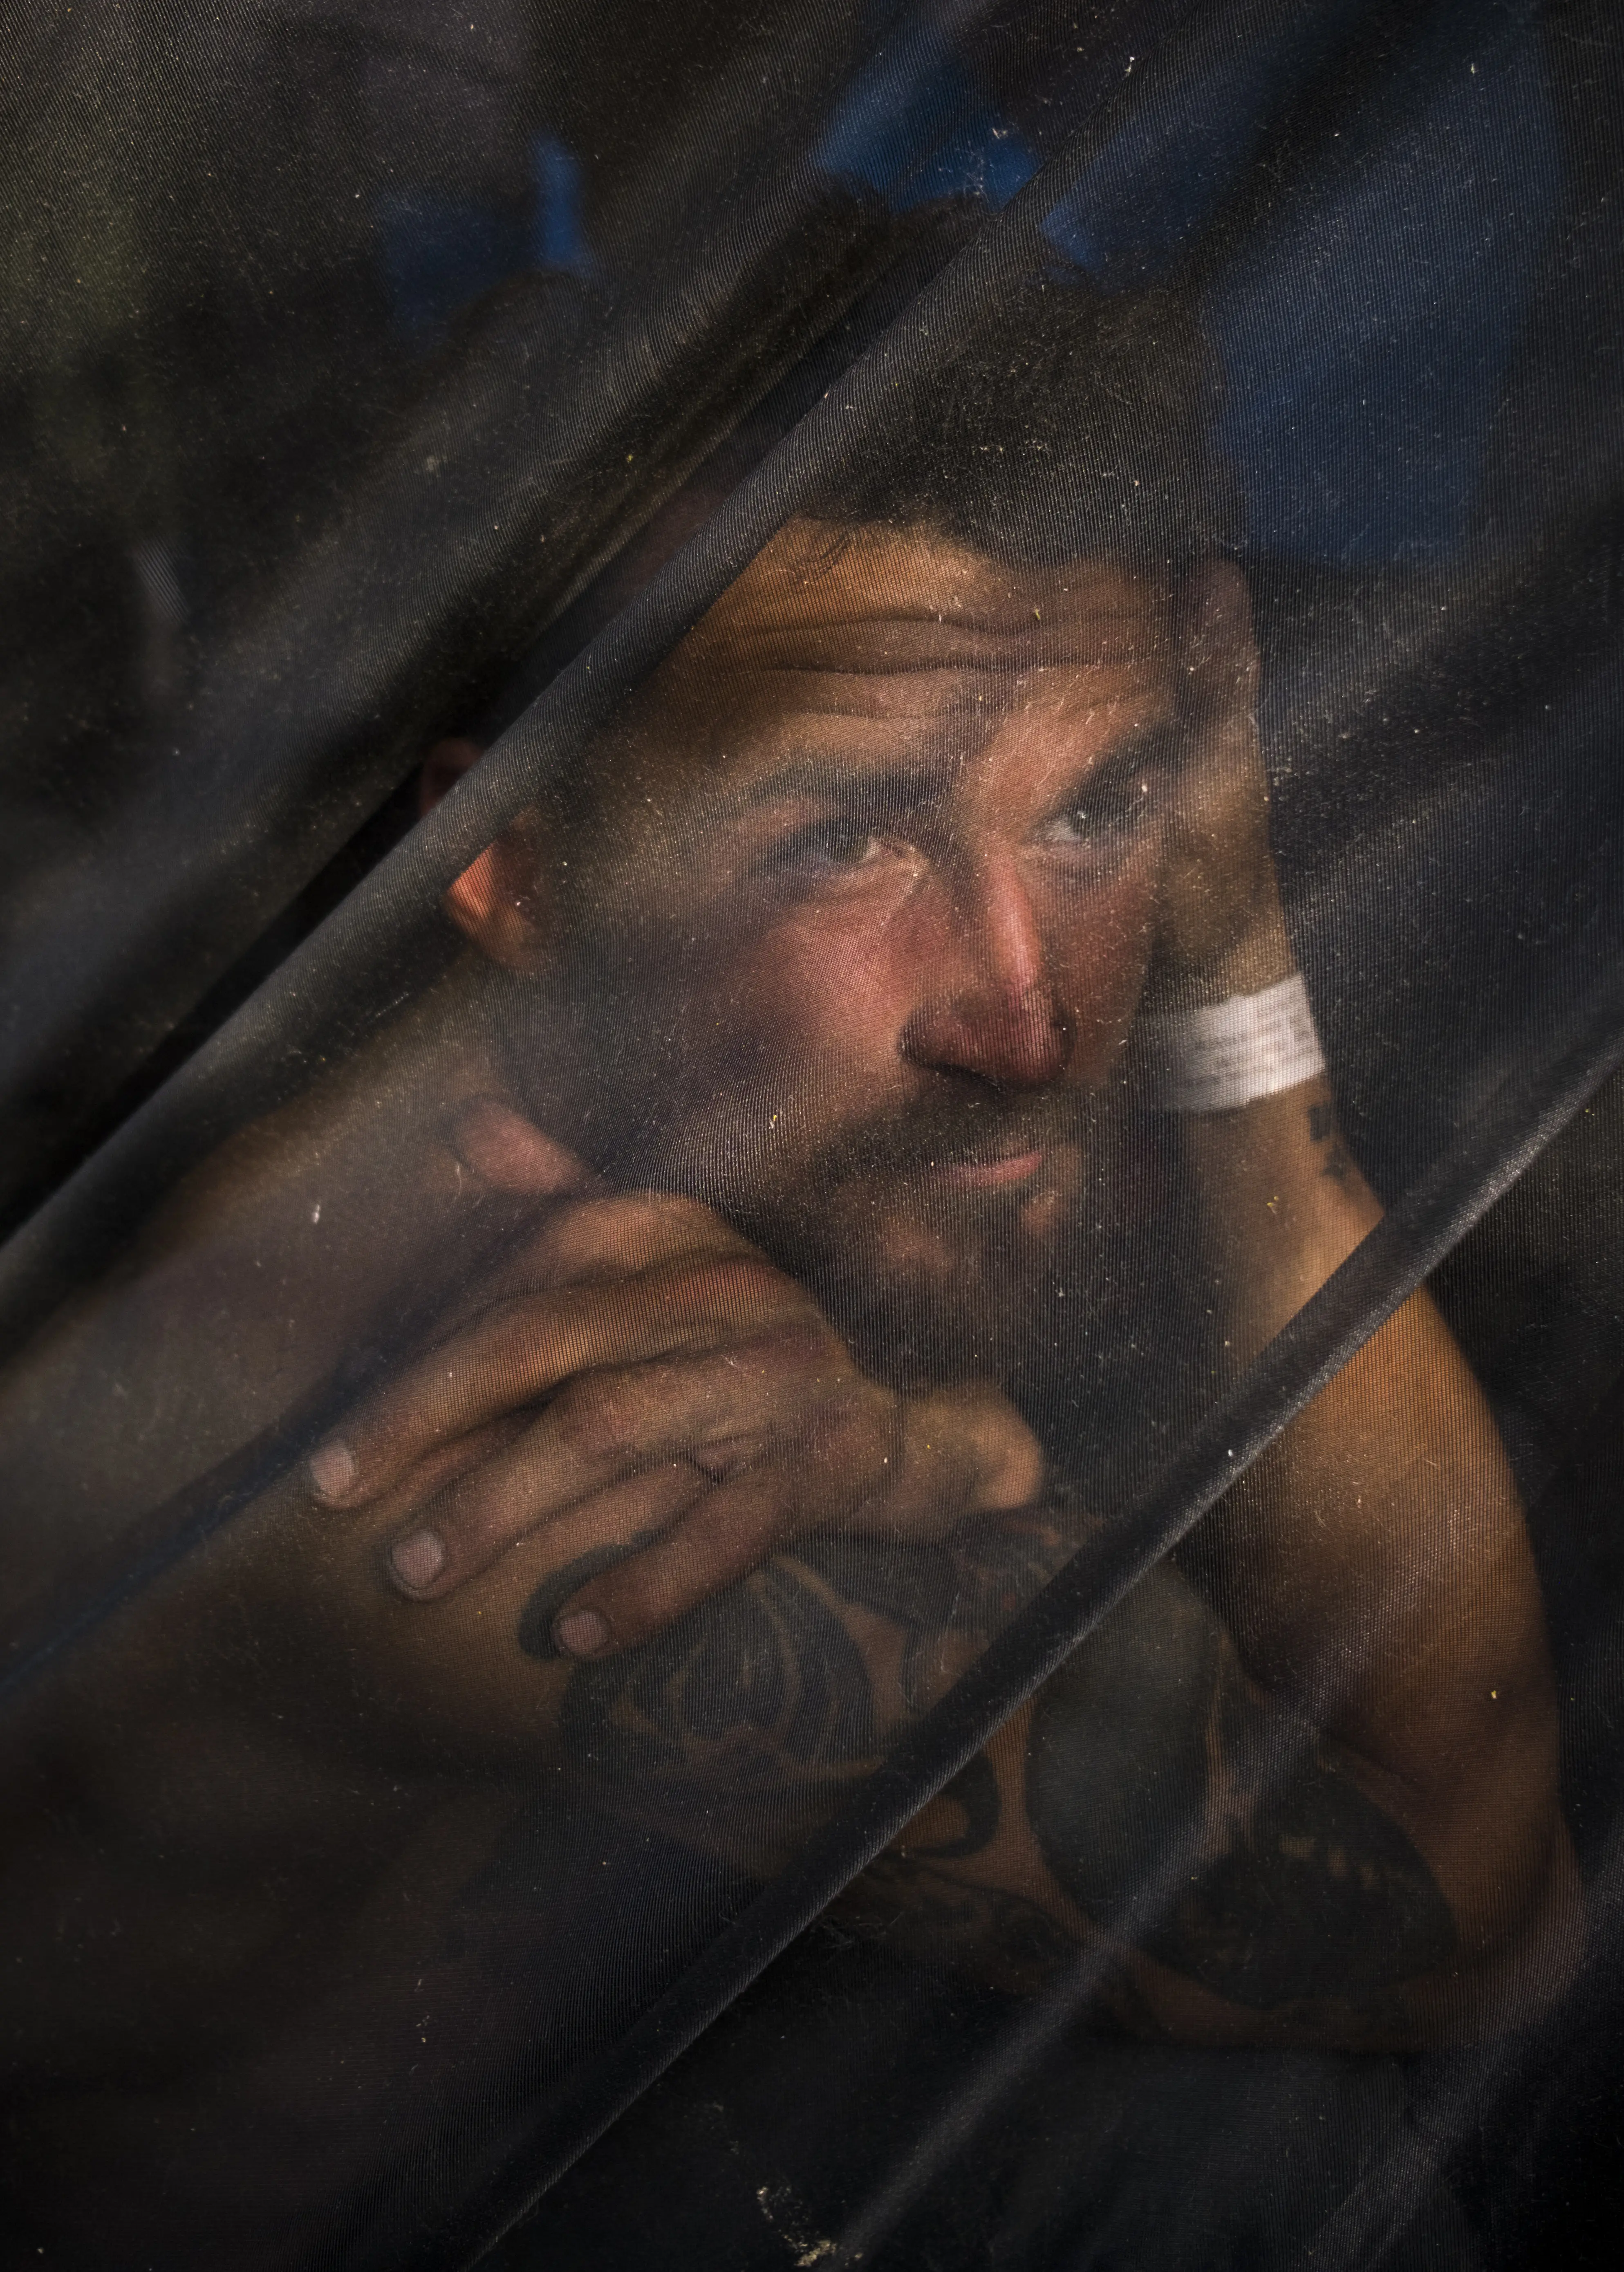 A man, lit dramatically by an out-of-frame source, looks away from the camera through his tent's screen.